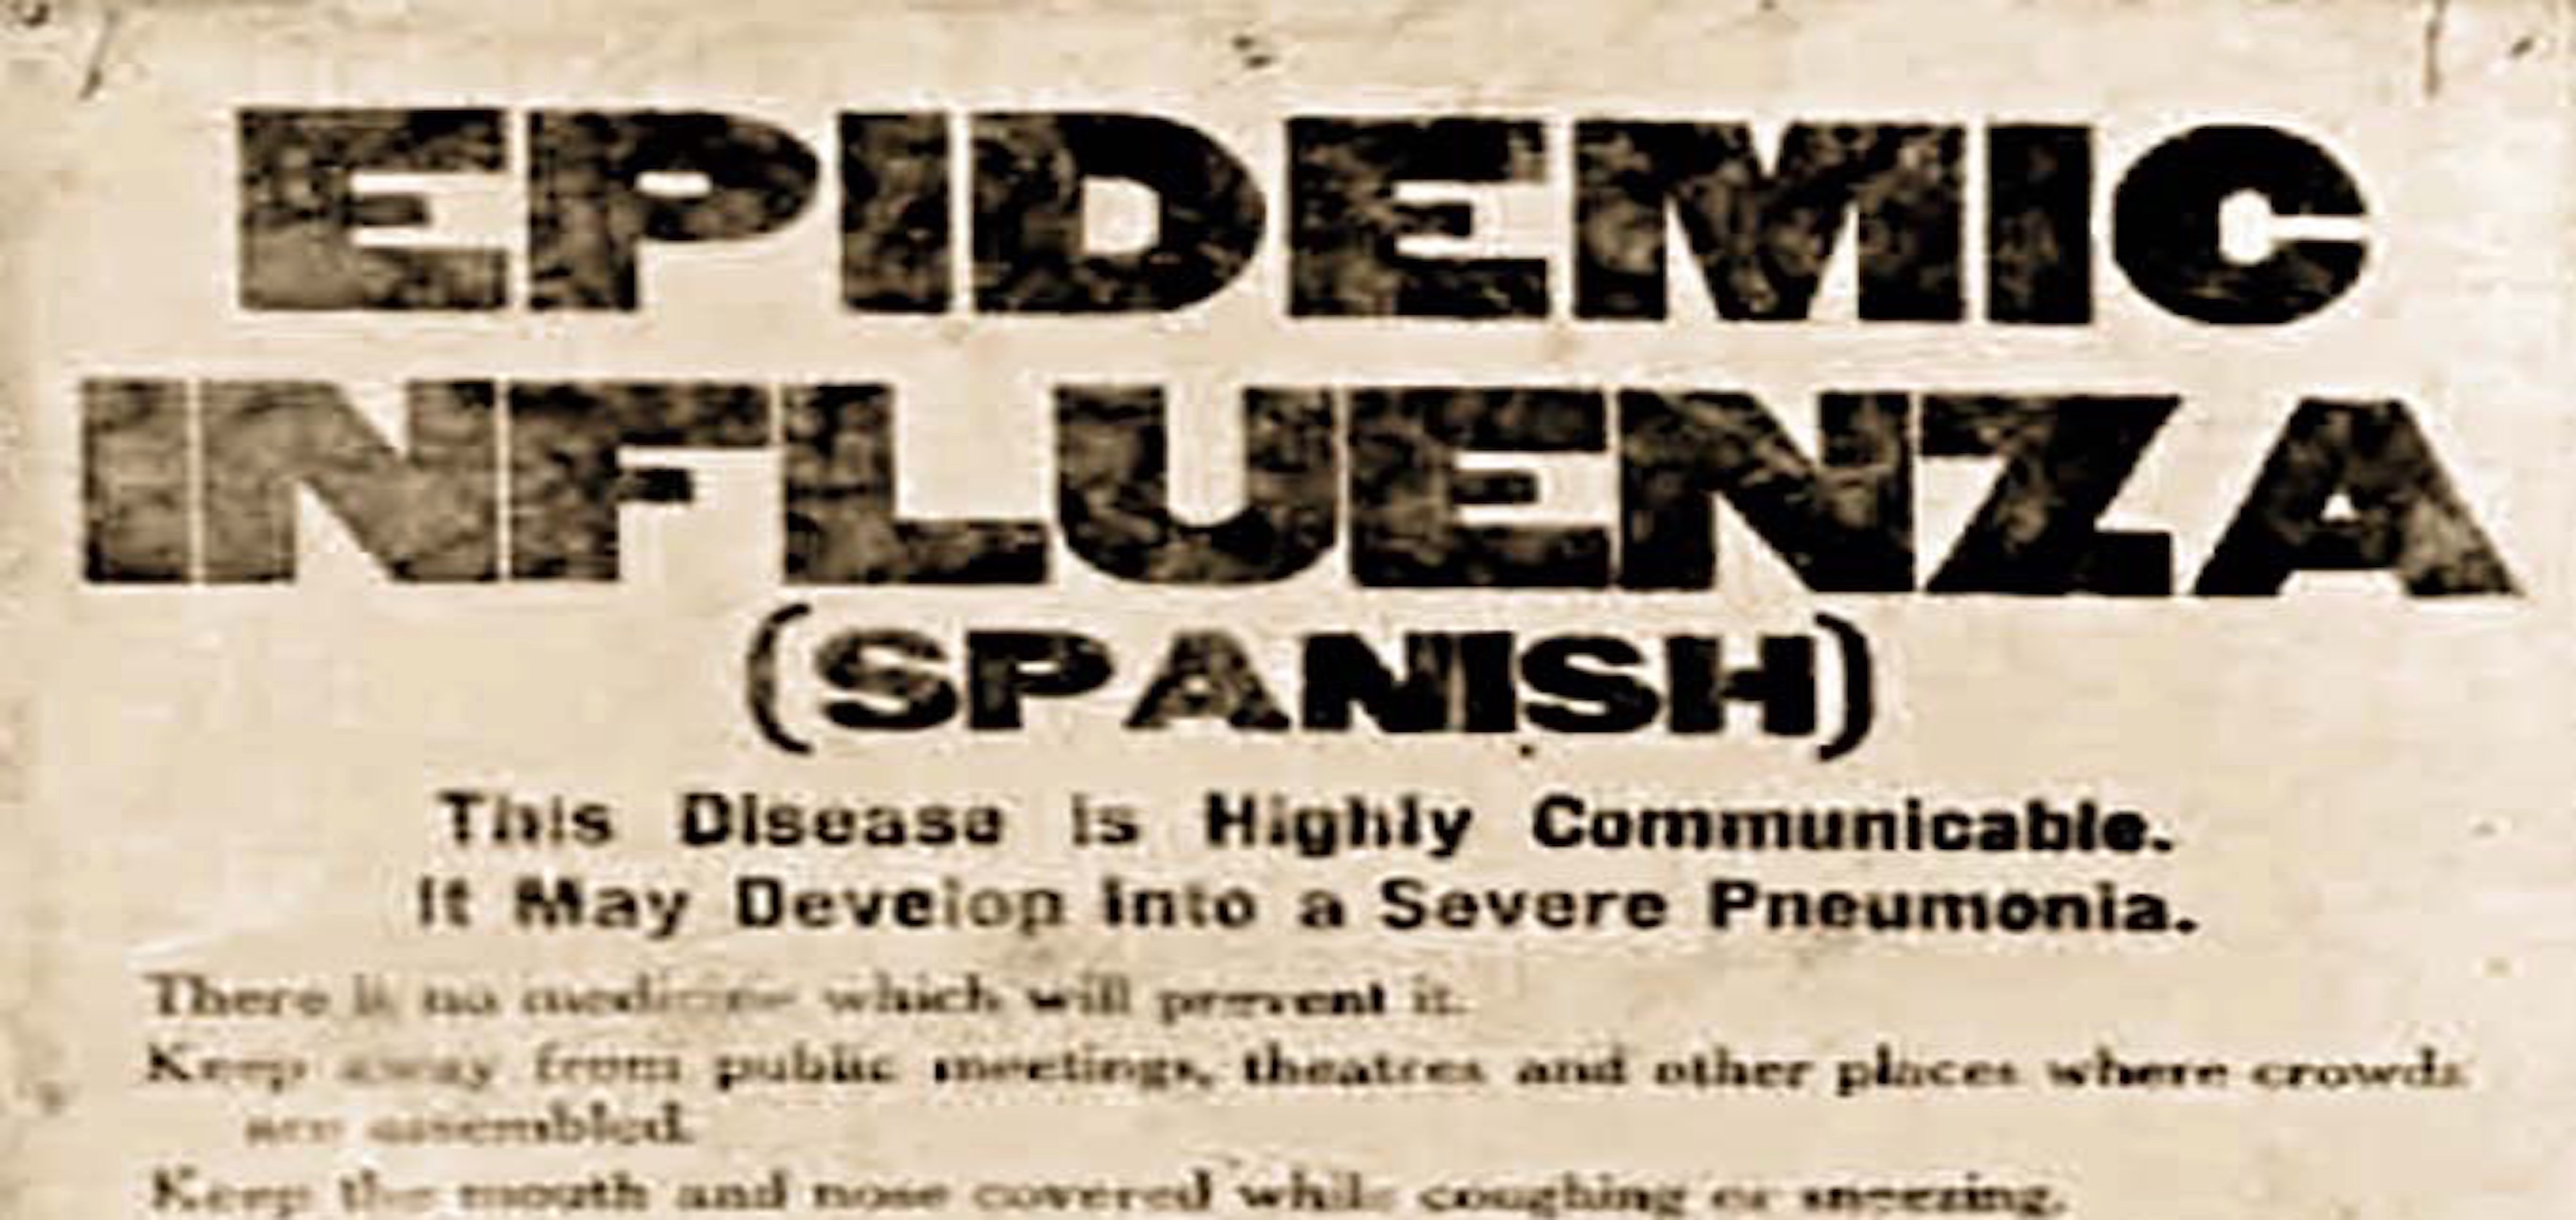 In 1918 and 2020, Race Colors America’s Response to Epidemics